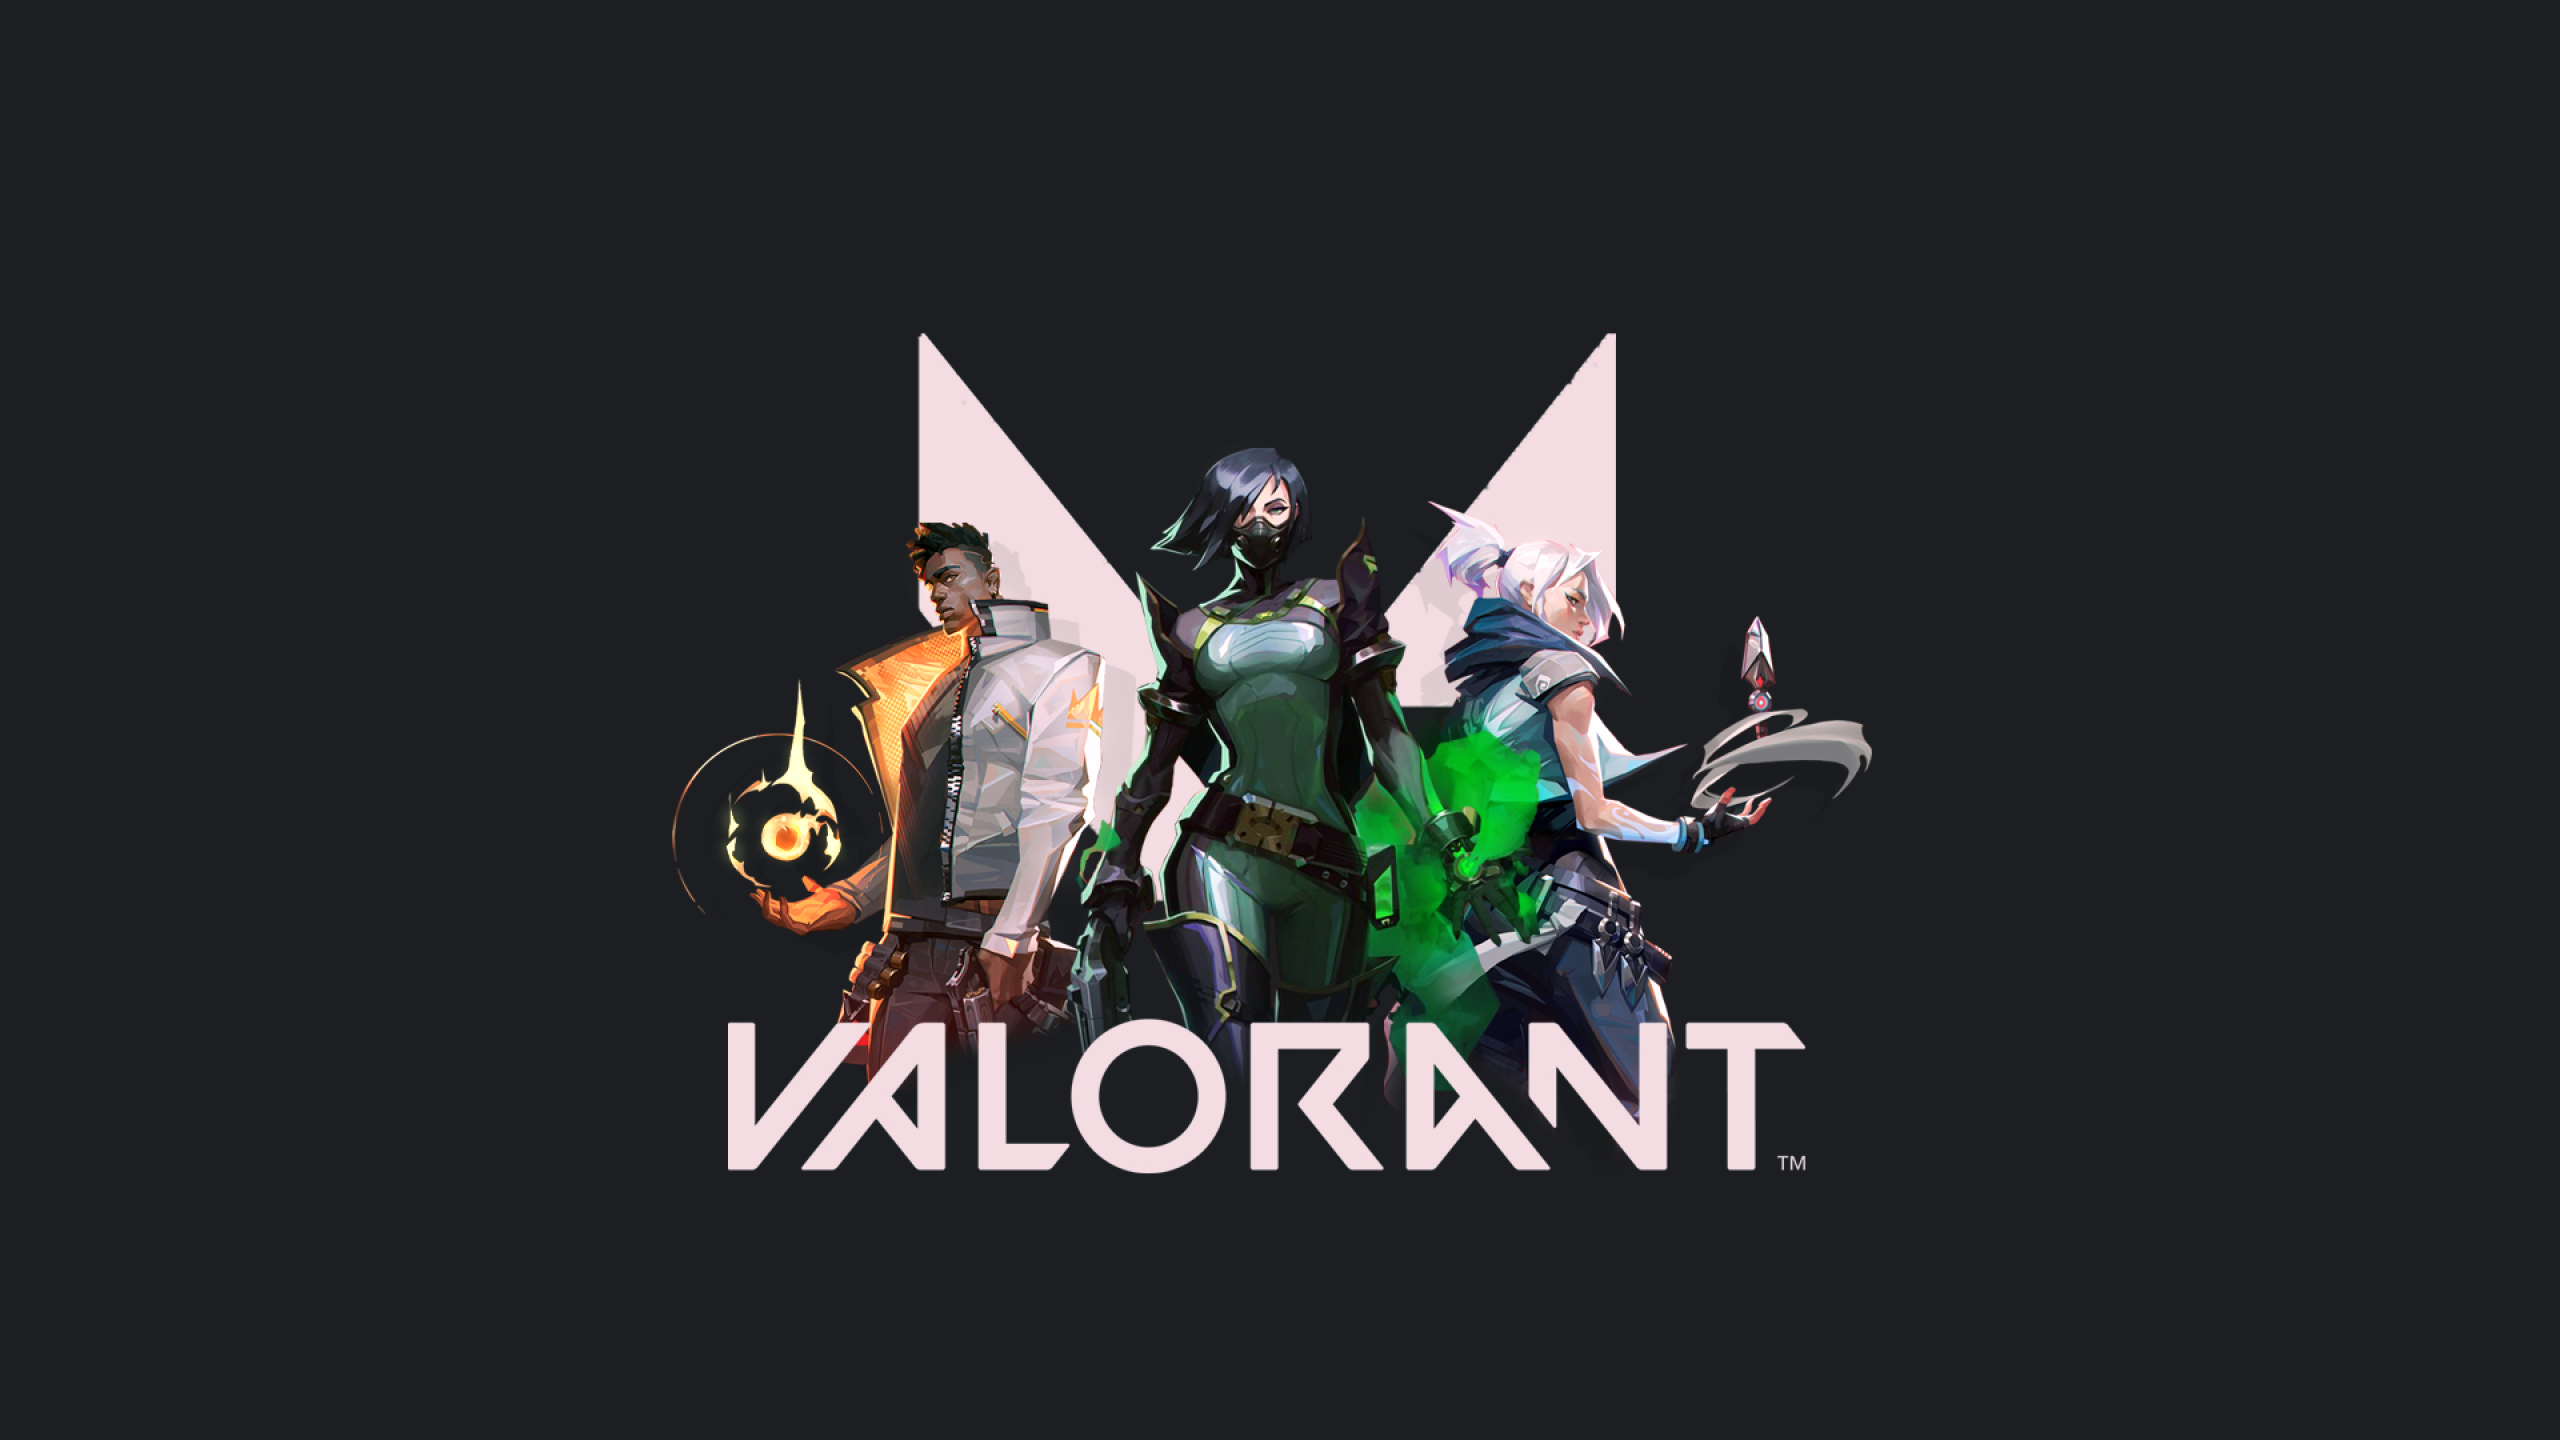 2560x1440 Valorant 1440p Resolution Wallpaper Hd Games 4k Wallpapers Images Photos And Background